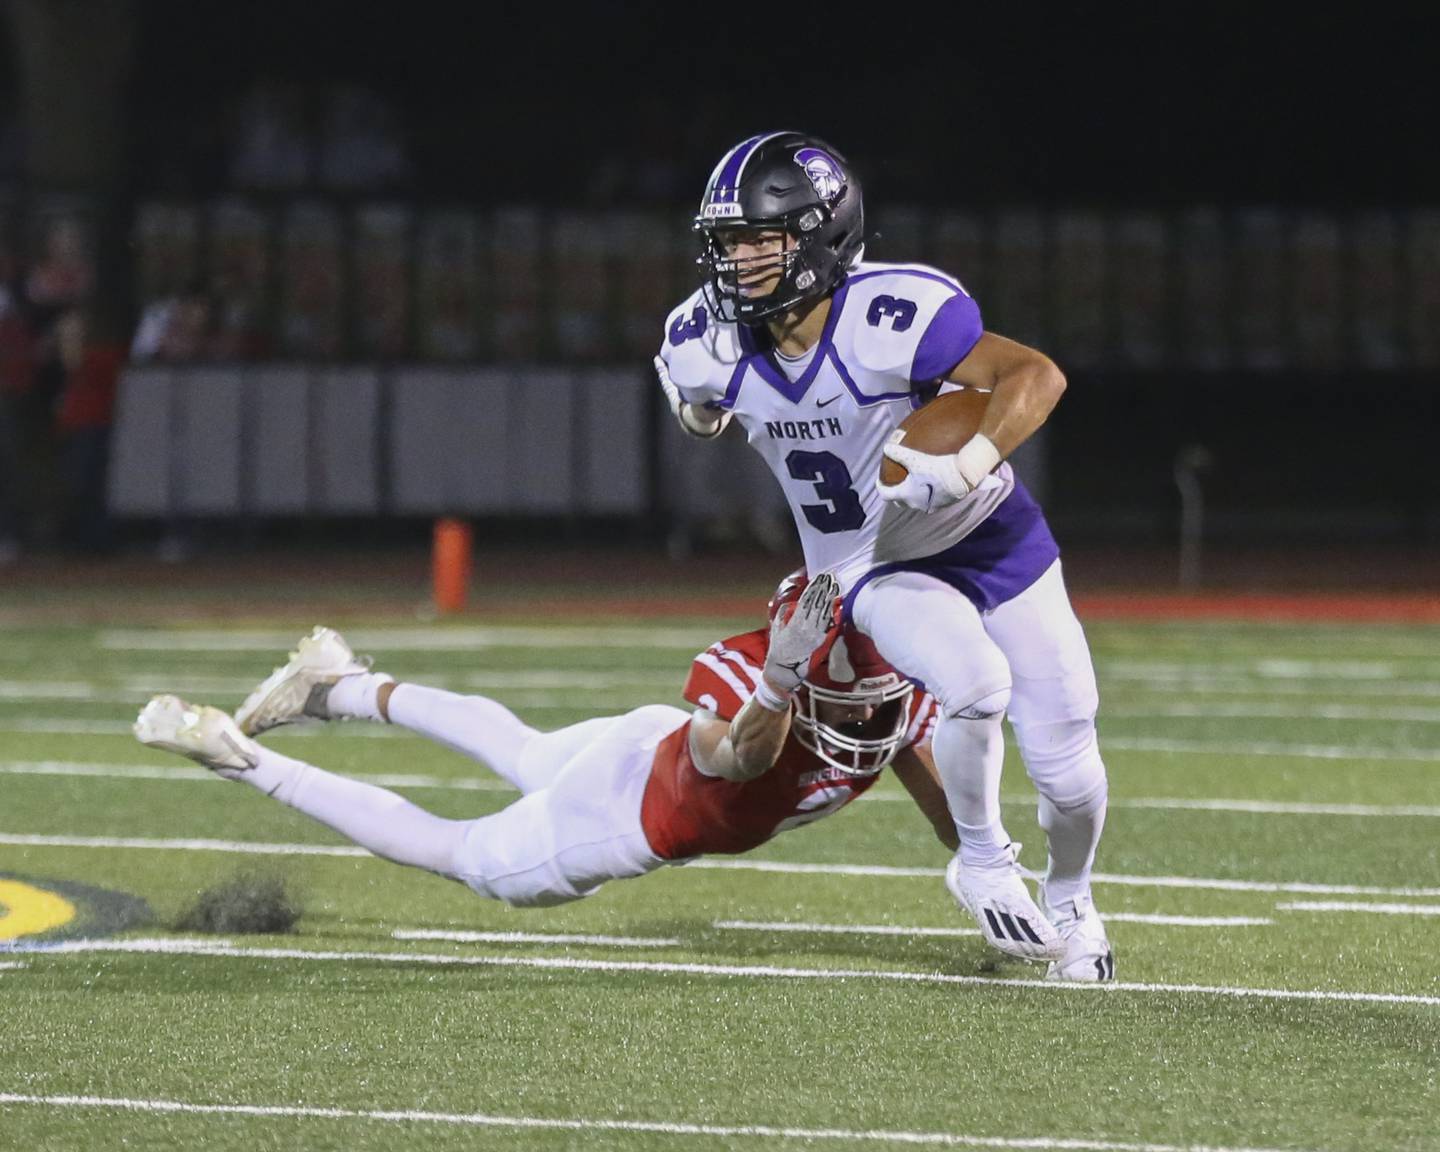 Downers Grove North's Ethan Thulin (3) runs back a punt during football game between Downers Grove North at Hinsdale Central. Oct 1, 2021.